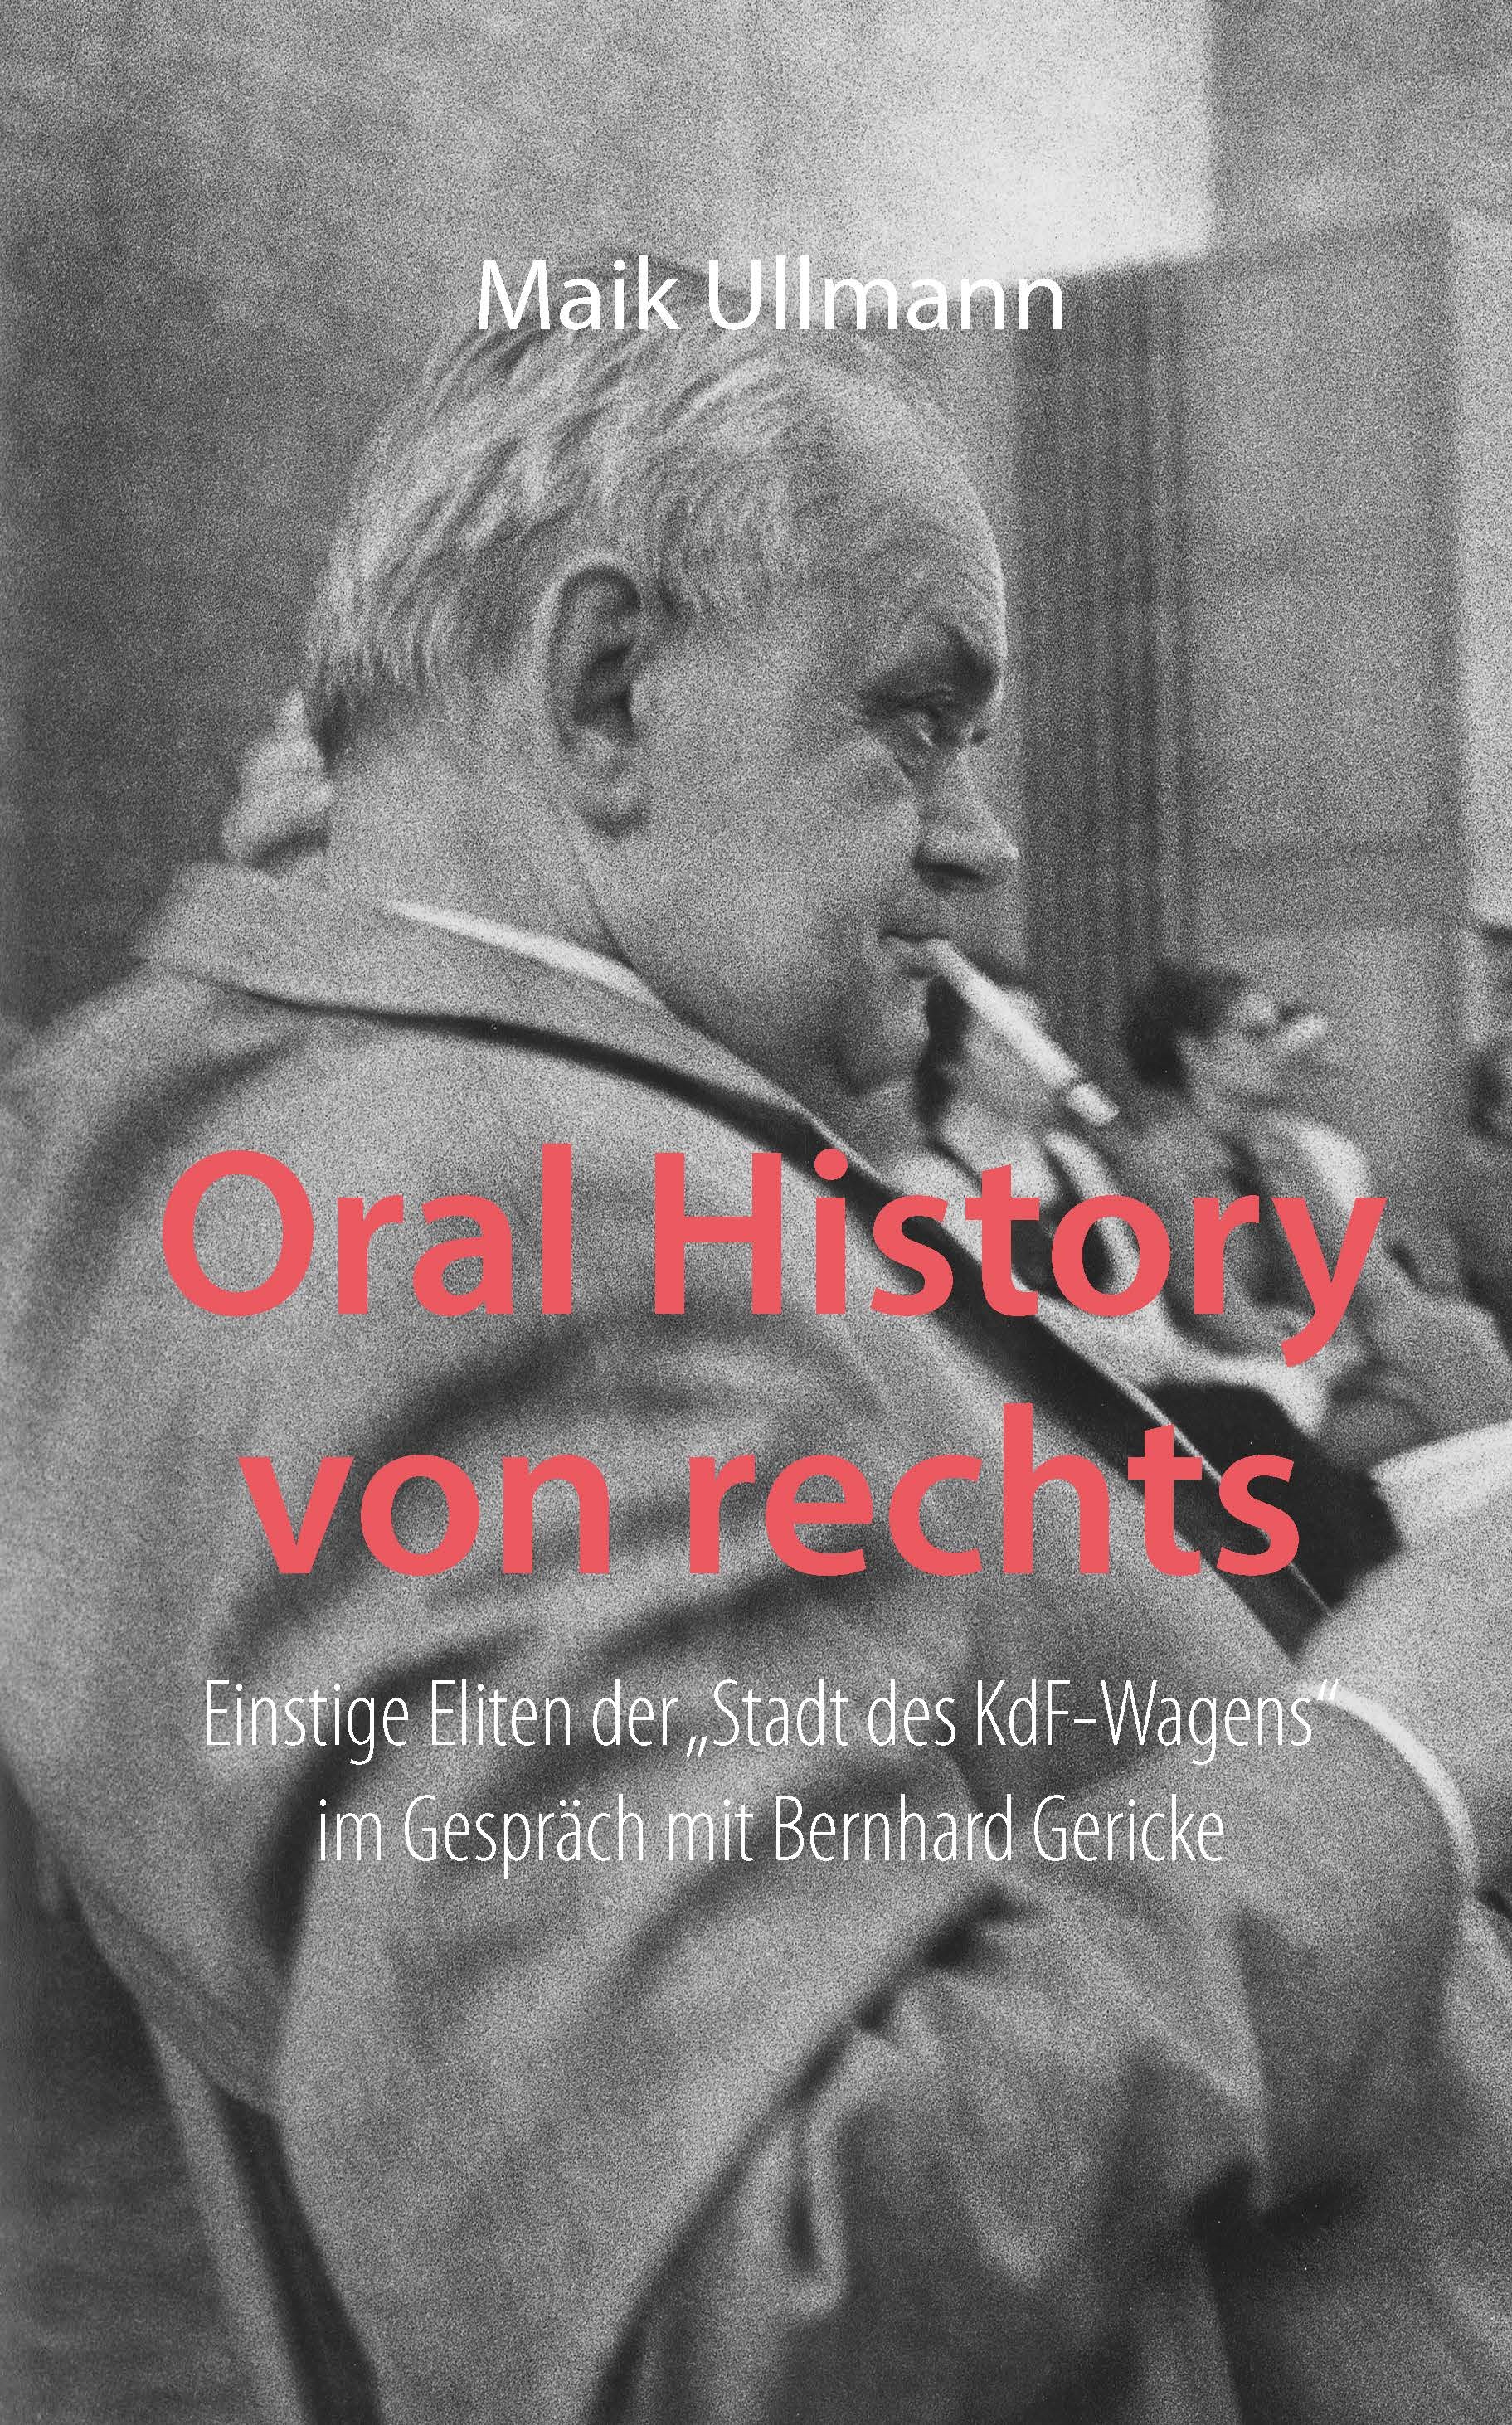 Title page of the book "Oral History from the Right. Former elites of the "City of the KdF-Wagen" in conversation with Bernhard Gericke"